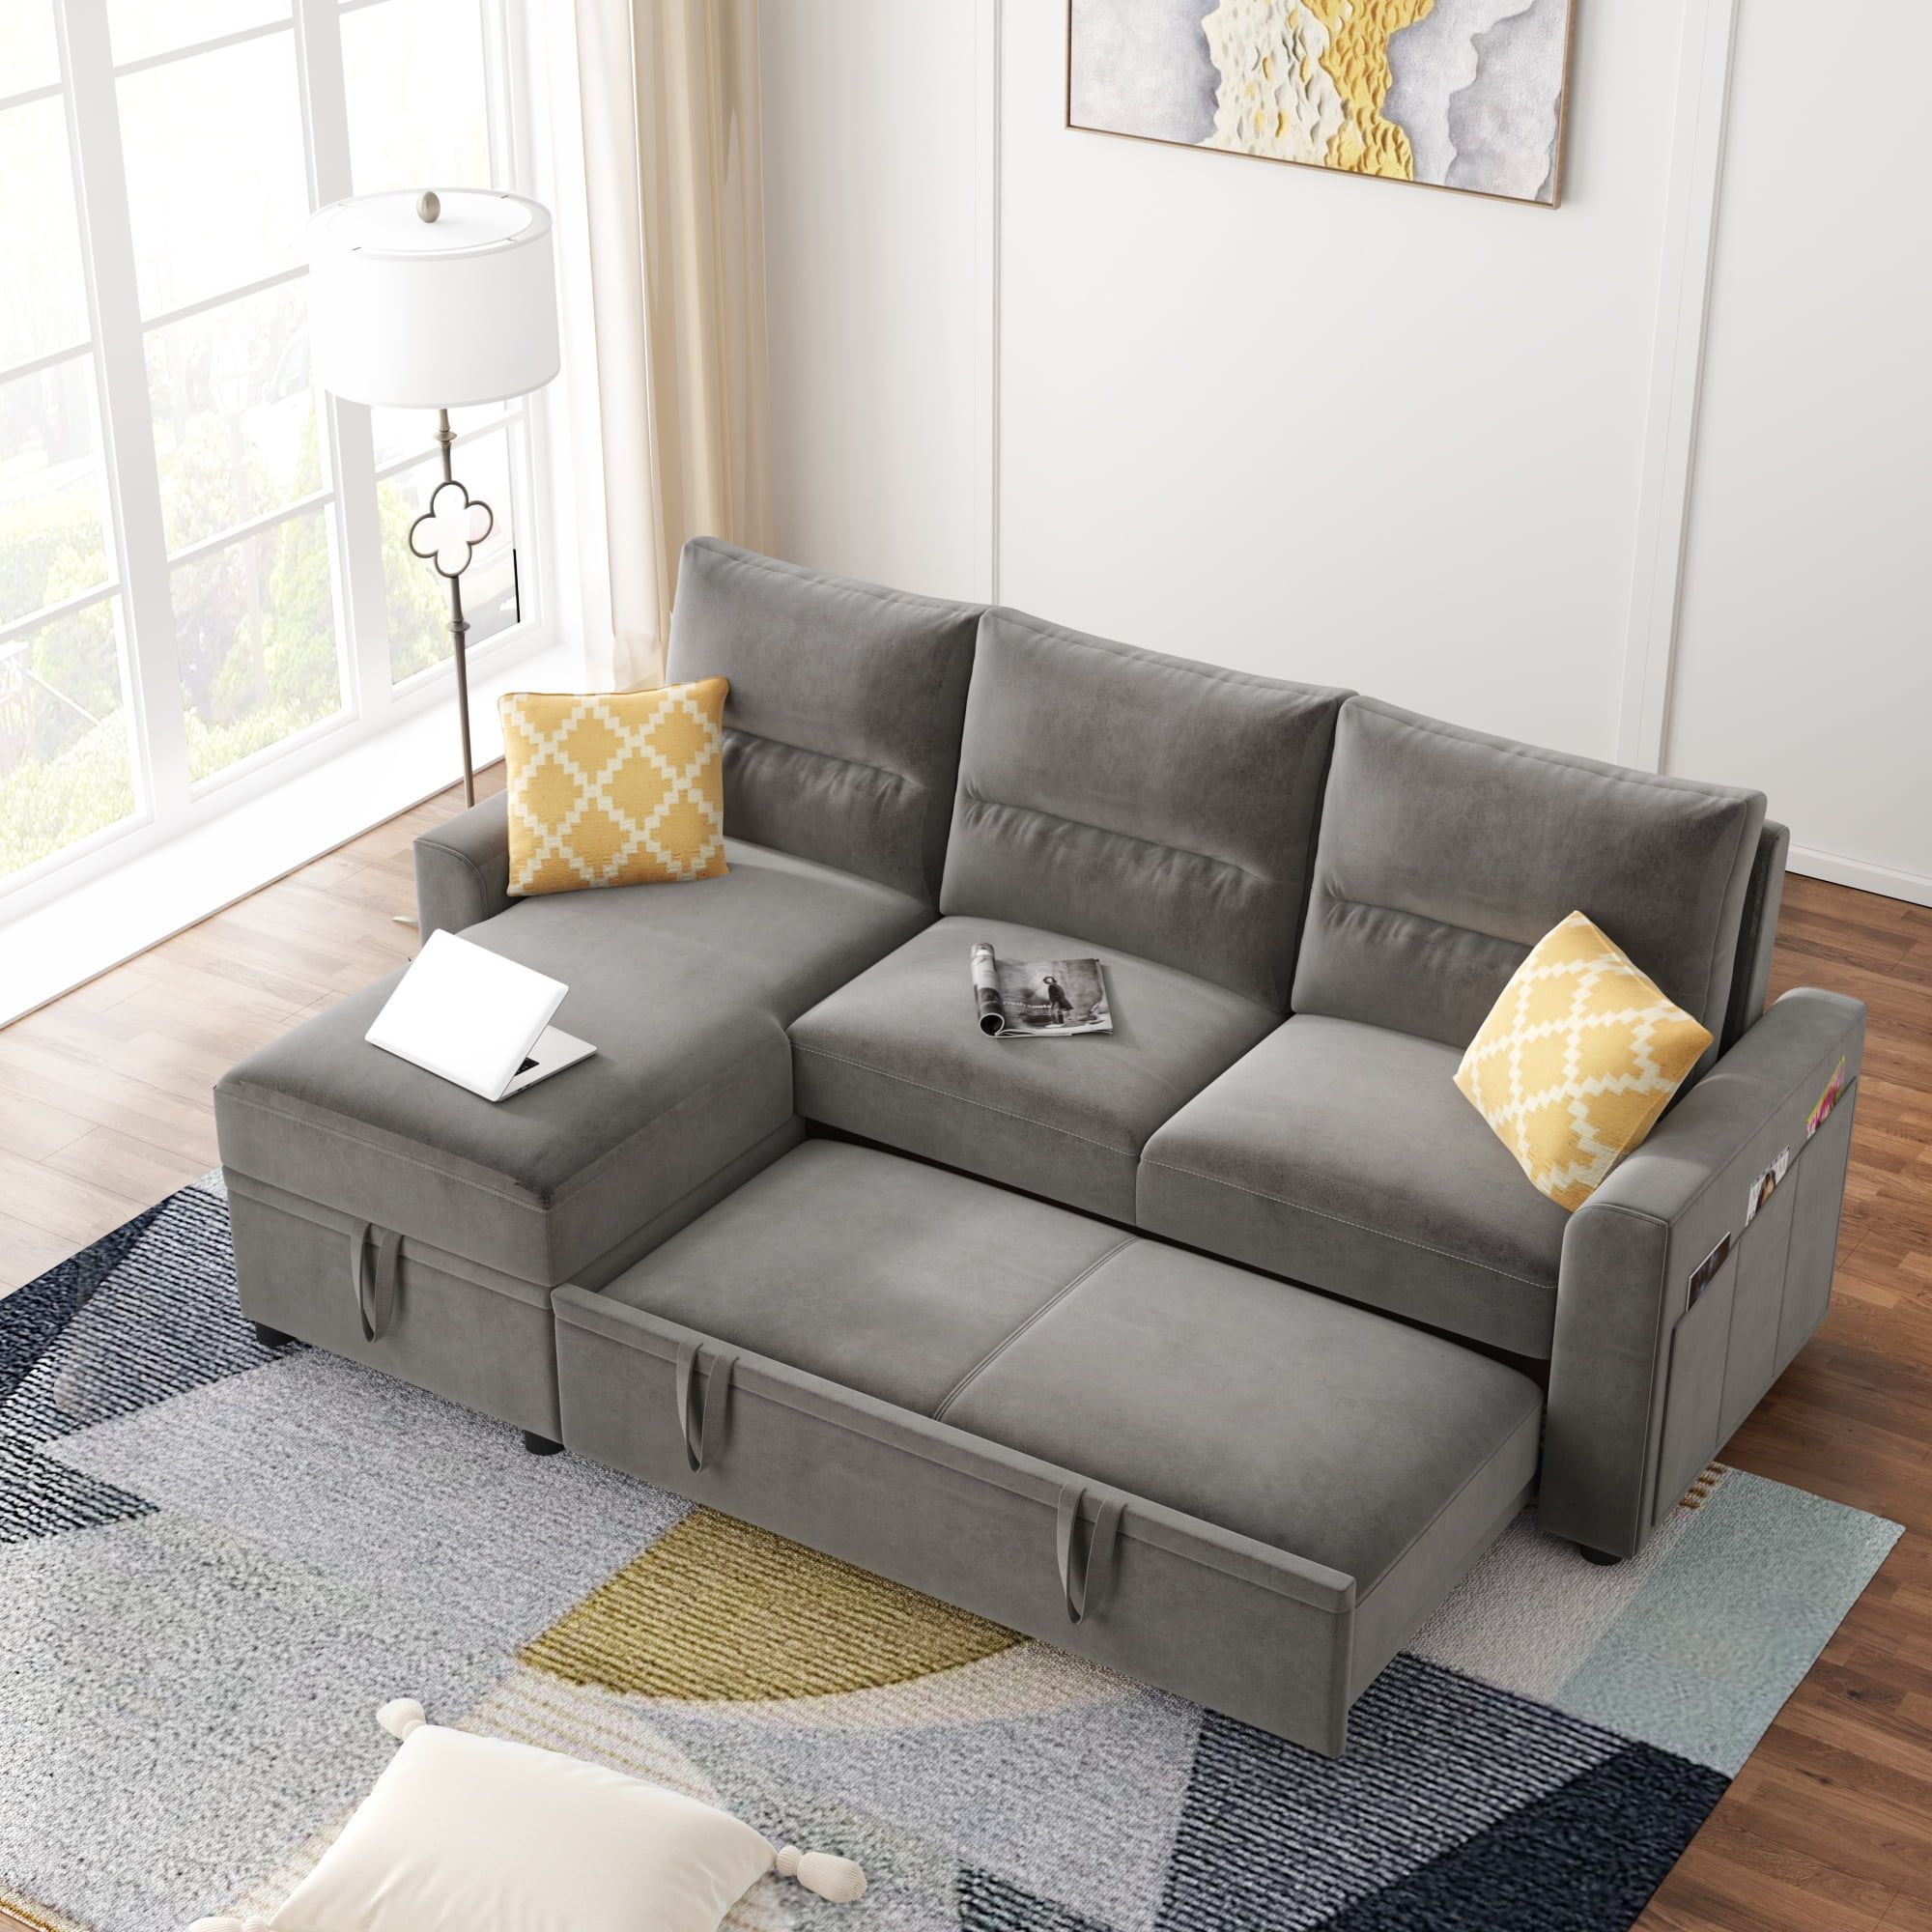 Upholstered Sectional Sleeper Sofa, Segmart 82.5'' Reversible Pull Out Pertaining To 2 In 1 Gray Pull Out Sofa Beds (Gallery 11 of 20)